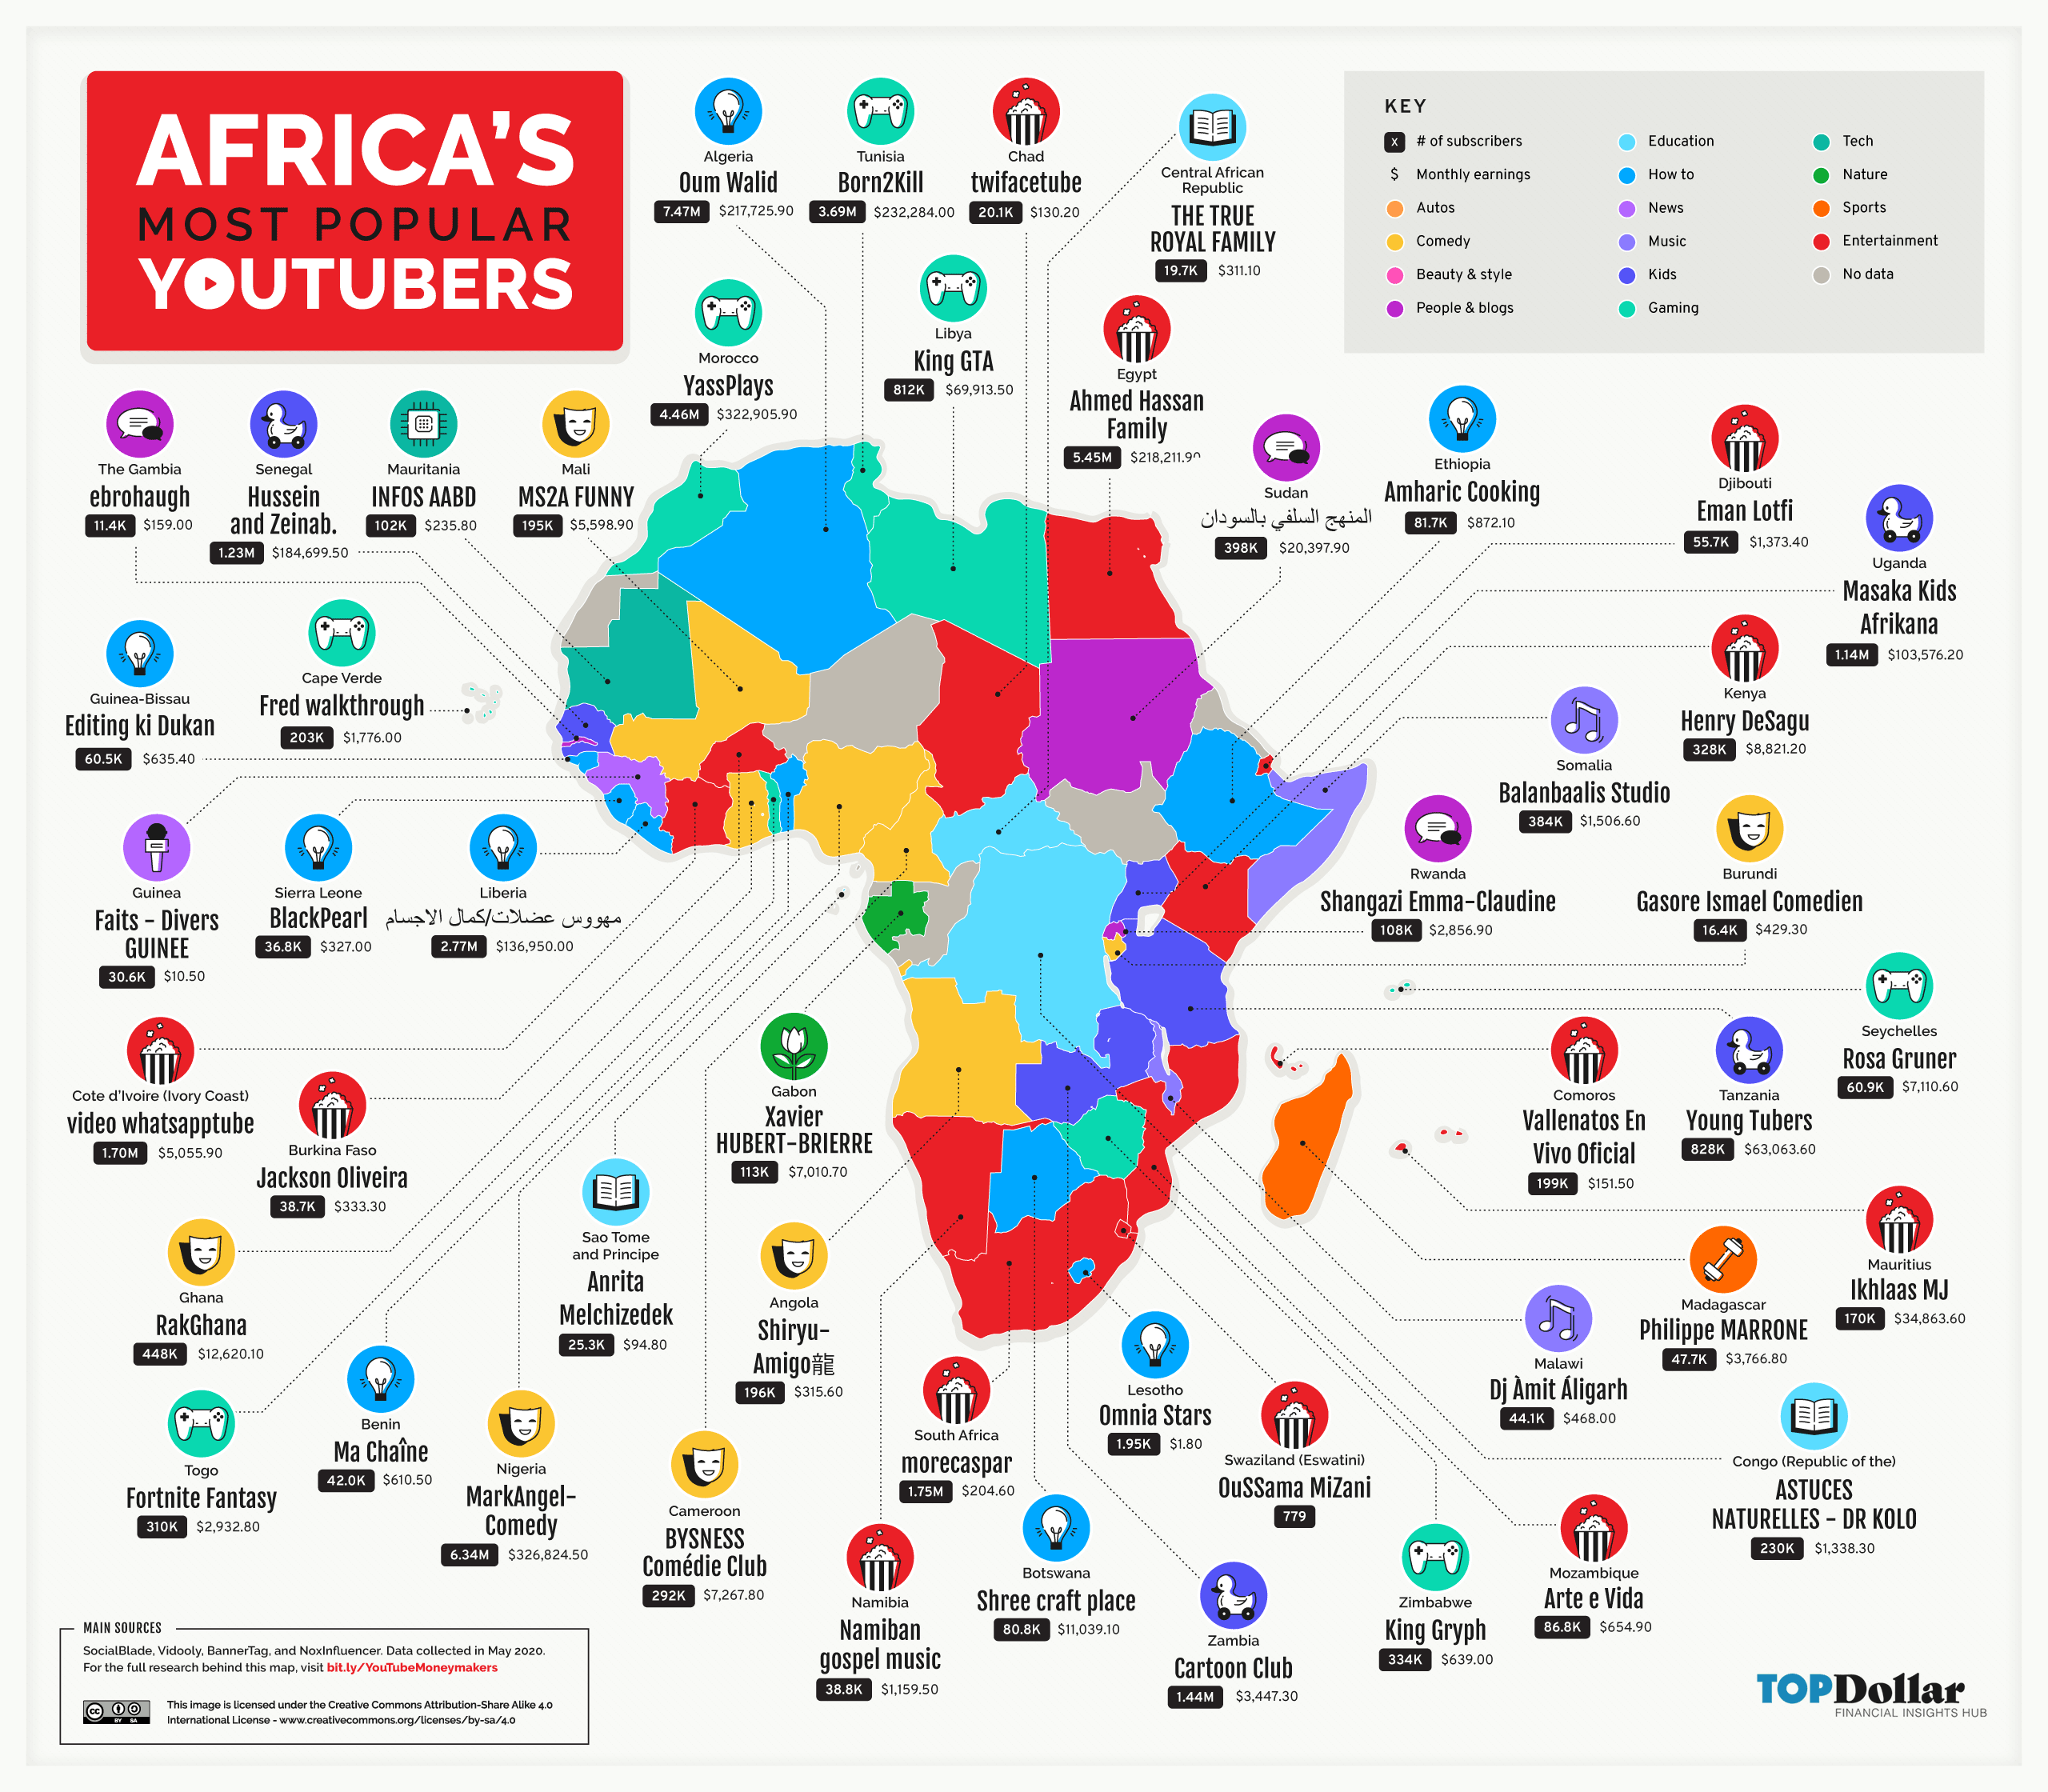 Africa's Most Popular YouTubers